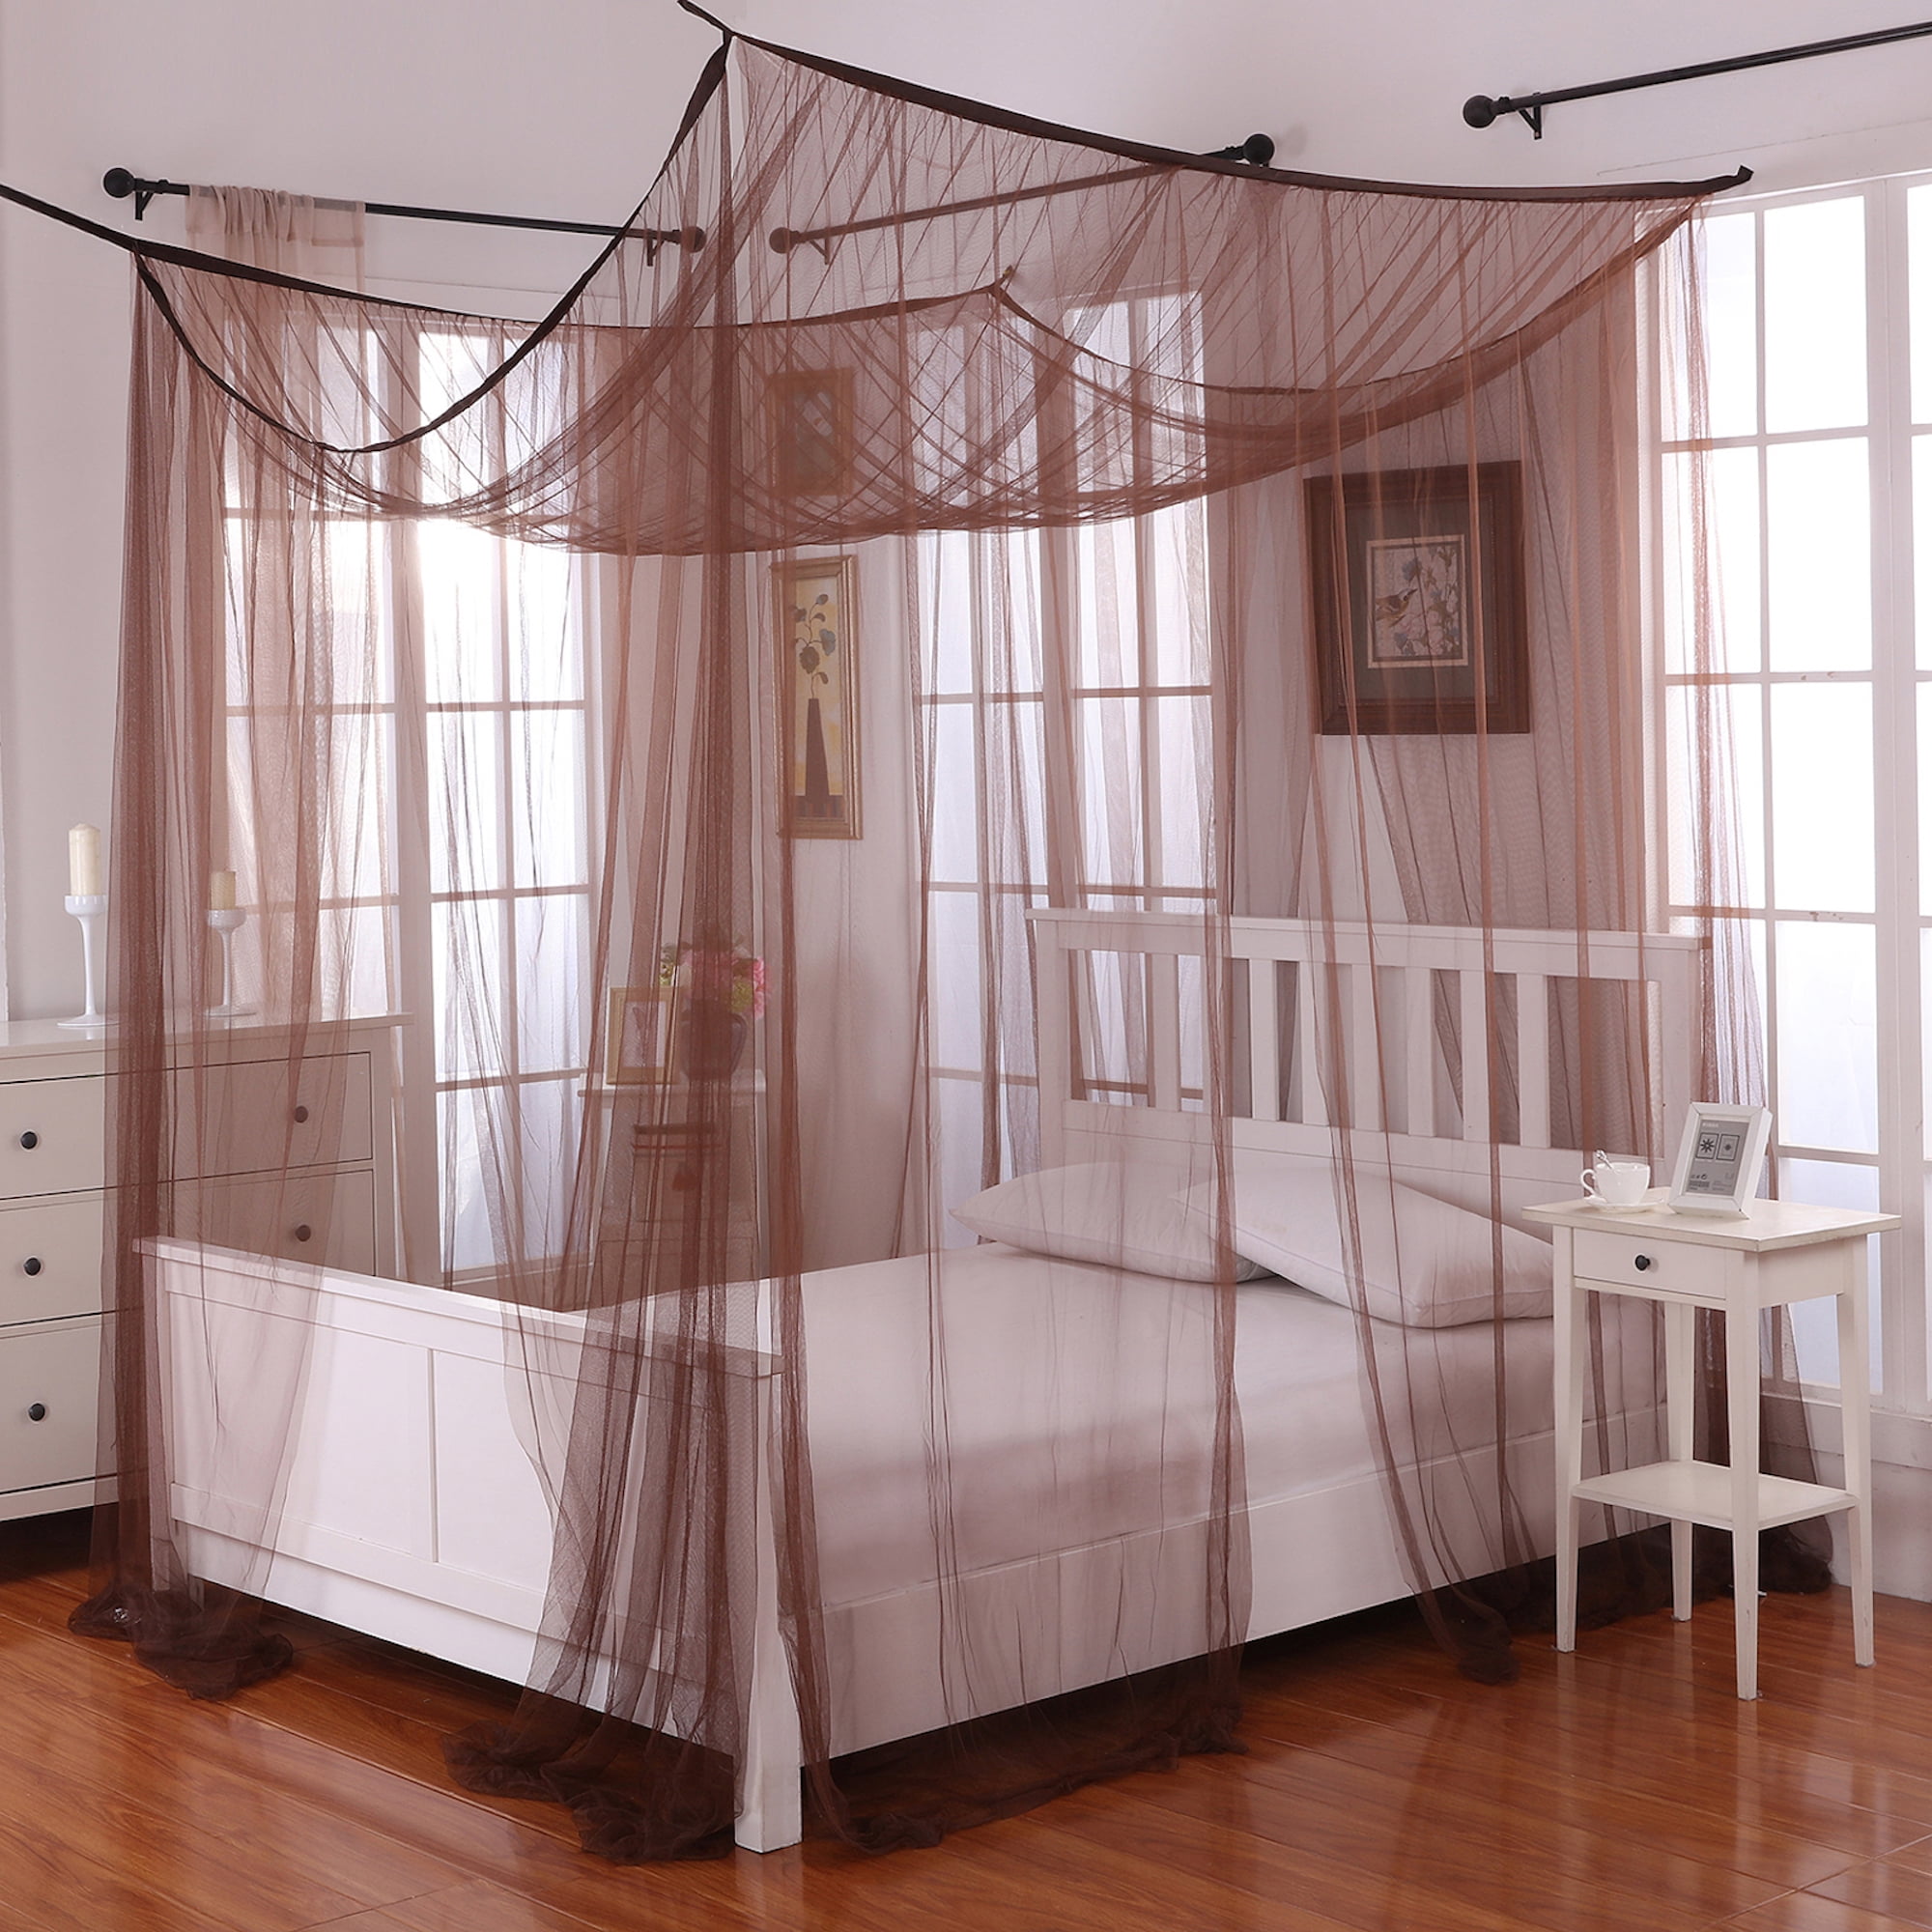 Palace Four Poster Bed Canopy - Walmart.com